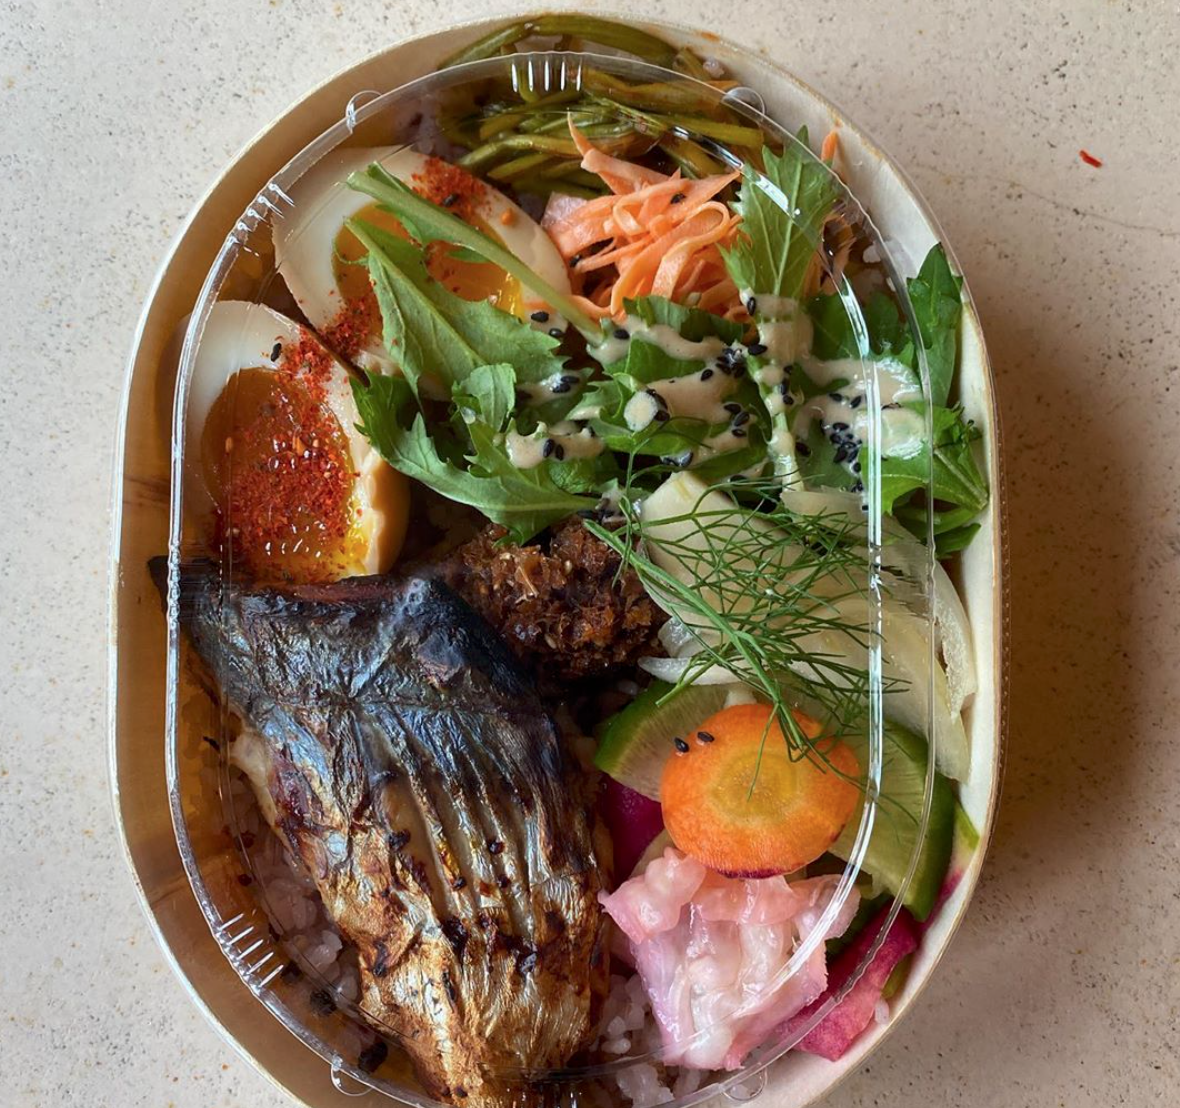 Where to Order and Take Out Food: Williamsburg